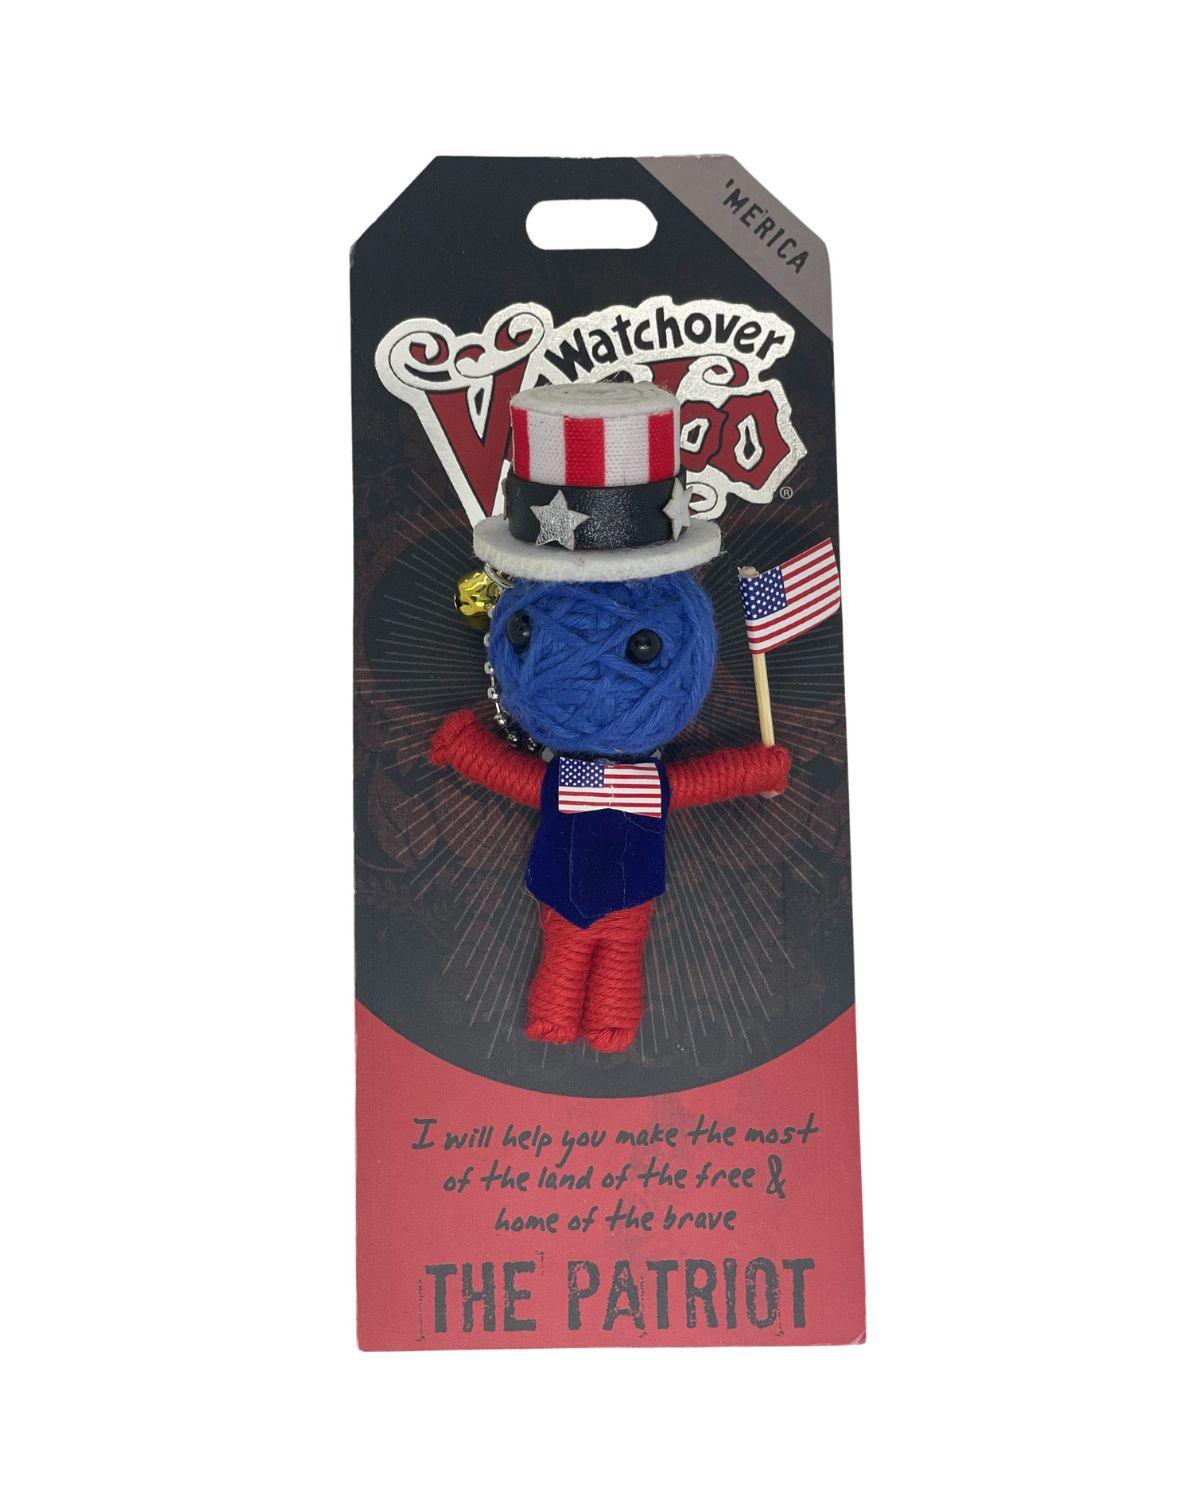 Watchover Voodoo Doll - The Patriot - Watchover Voodoo - String Doll